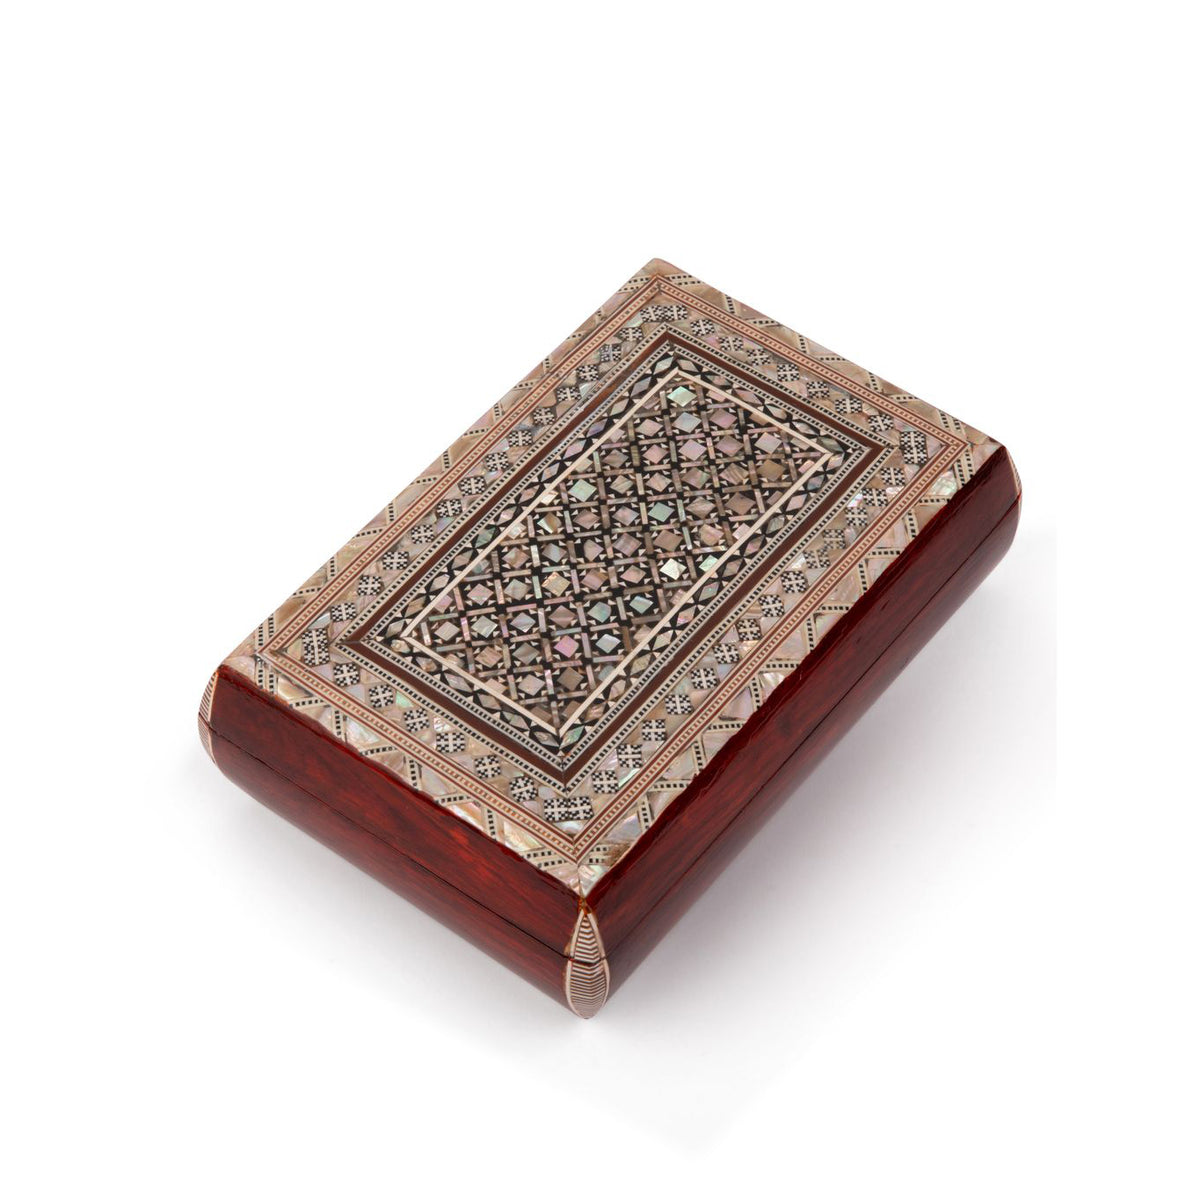 Mother-of-Pearl Inlaid Jewelry Box